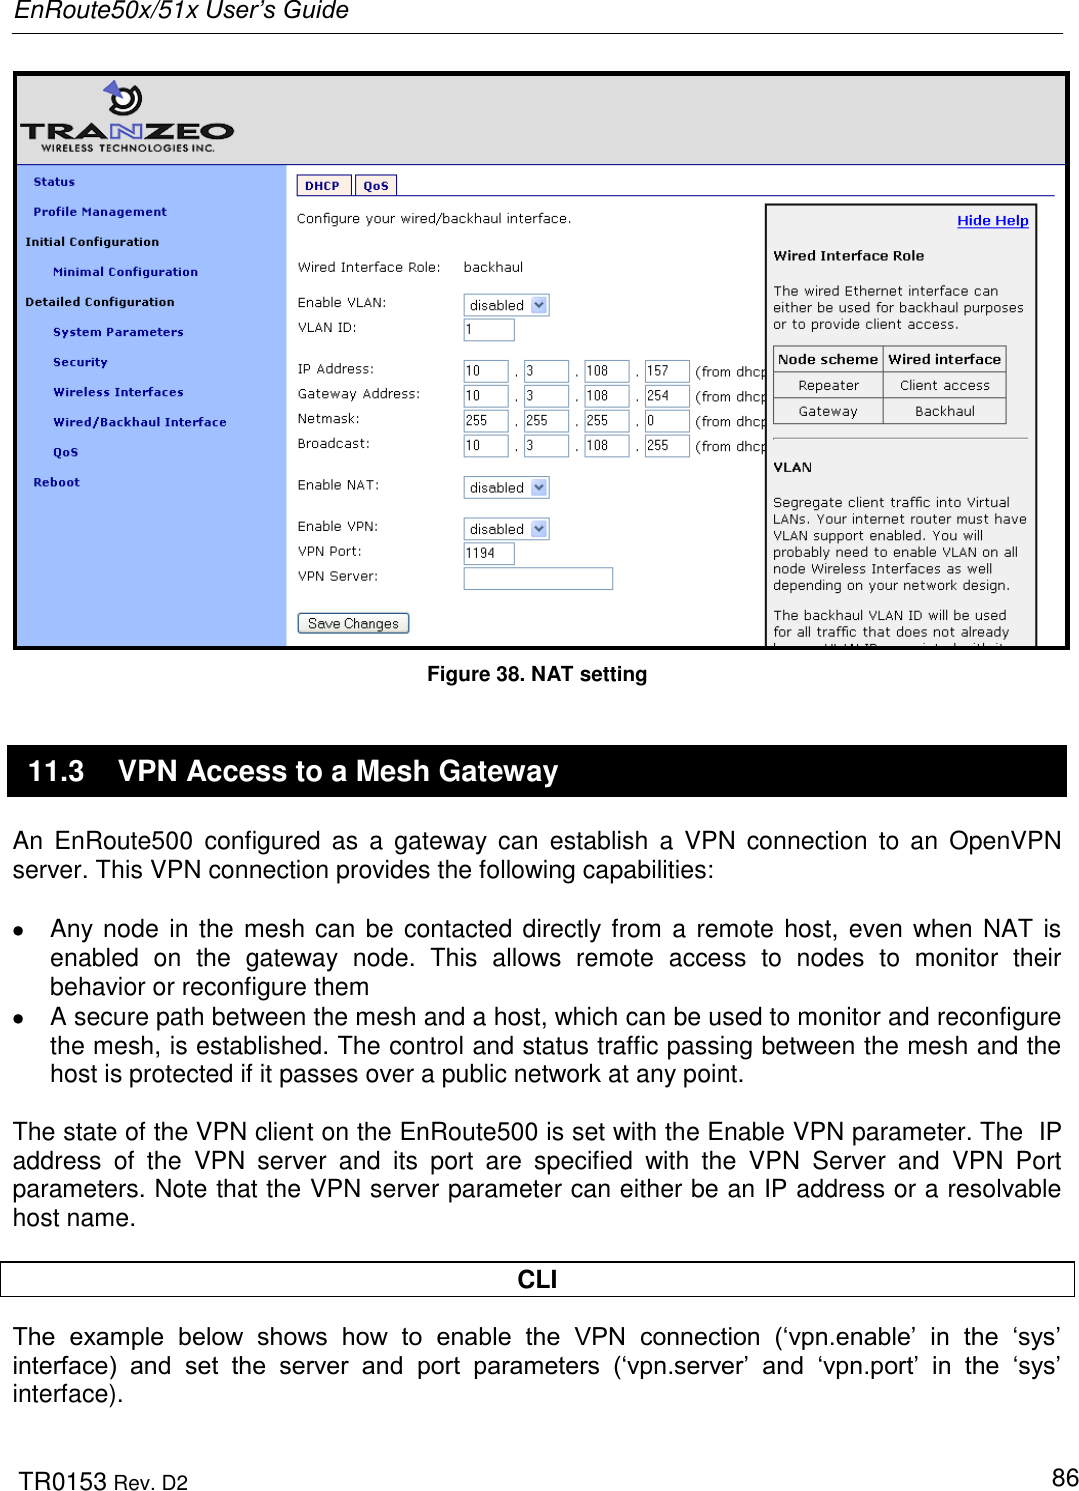 EnRoute50x/51x User’s Guide  TR0153 Rev. D2   86  Figure 38. NAT setting 11.3  VPN Access to a Mesh Gateway An  EnRoute500  configured as  a gateway  can  establish  a  VPN  connection  to  an  OpenVPN server. This VPN connection provides the following capabilities:    Any node in the mesh can be contacted directly from a remote host, even when NAT is enabled  on  the  gateway  node.  This  allows  remote  access  to  nodes  to  monitor  their behavior or reconfigure them   A secure path between the mesh and a host, which can be used to monitor and reconfigure the mesh, is established. The control and status traffic passing between the mesh and the host is protected if it passes over a public network at any point.  The state of the VPN client on the EnRoute500 is set with the Enable VPN parameter. The  IP address  of  the  VPN  server  and  its  port  are  specified  with  the  VPN  Server  and  VPN  Port parameters. Note that the VPN server parameter can either be an IP address or a resolvable host name.   CLI The  example  below  shows  how  to  enable  the  VPN  connection  („vpn.enable‟  in  the  „sys‟ interface)  and  set  the  server  and  port  parameters  („vpn.server‟  and  „vpn.port‟  in  the  „sys‟ interface).  